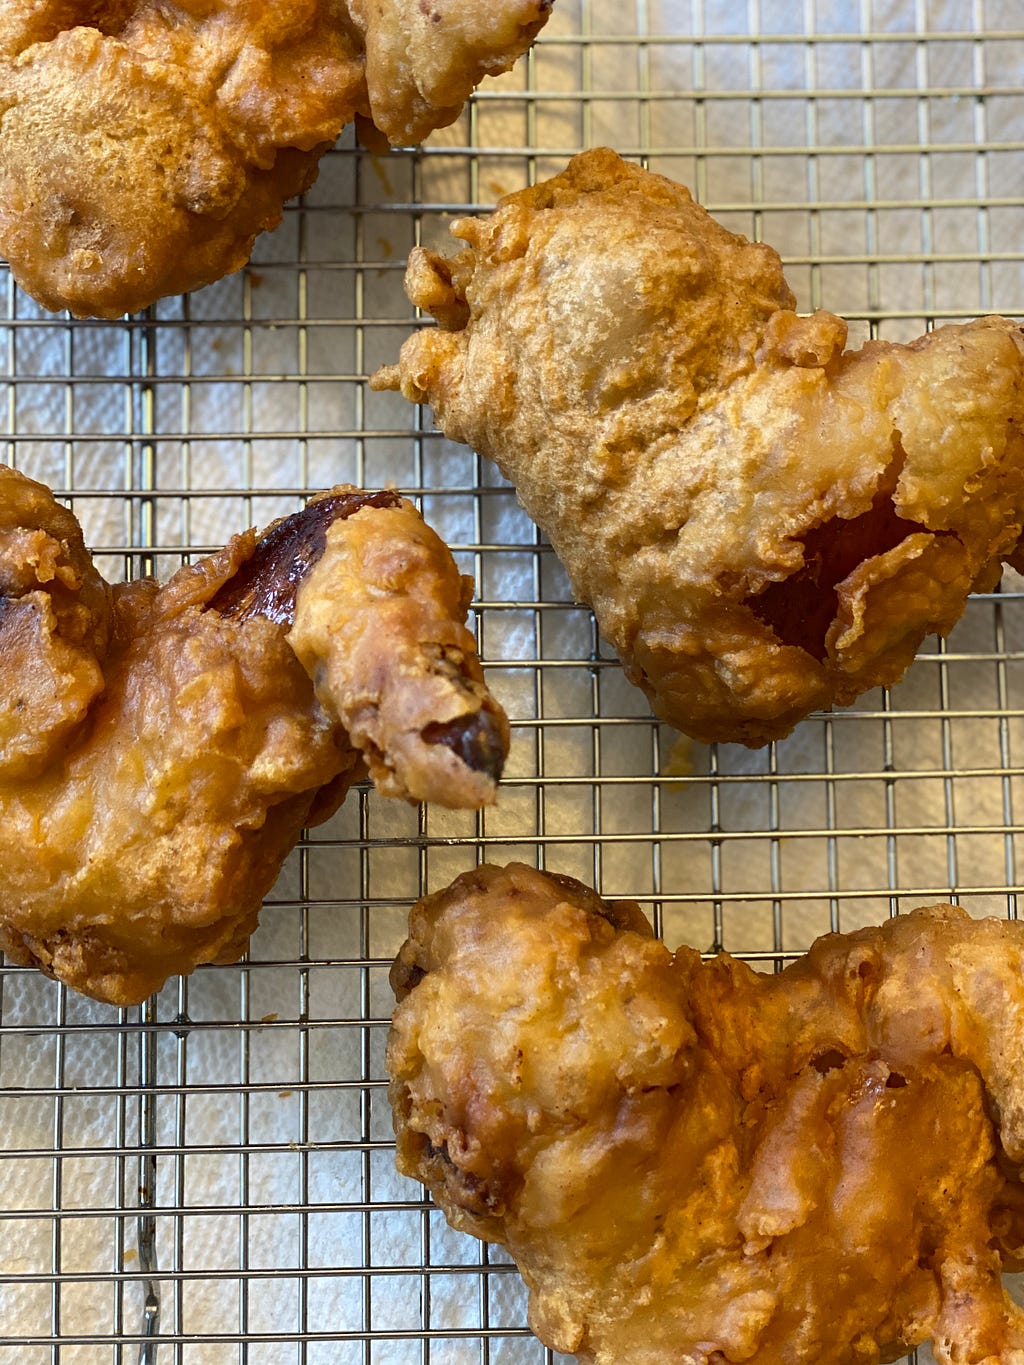 Crispy golden fried chicken wings sit on a cooling rack.